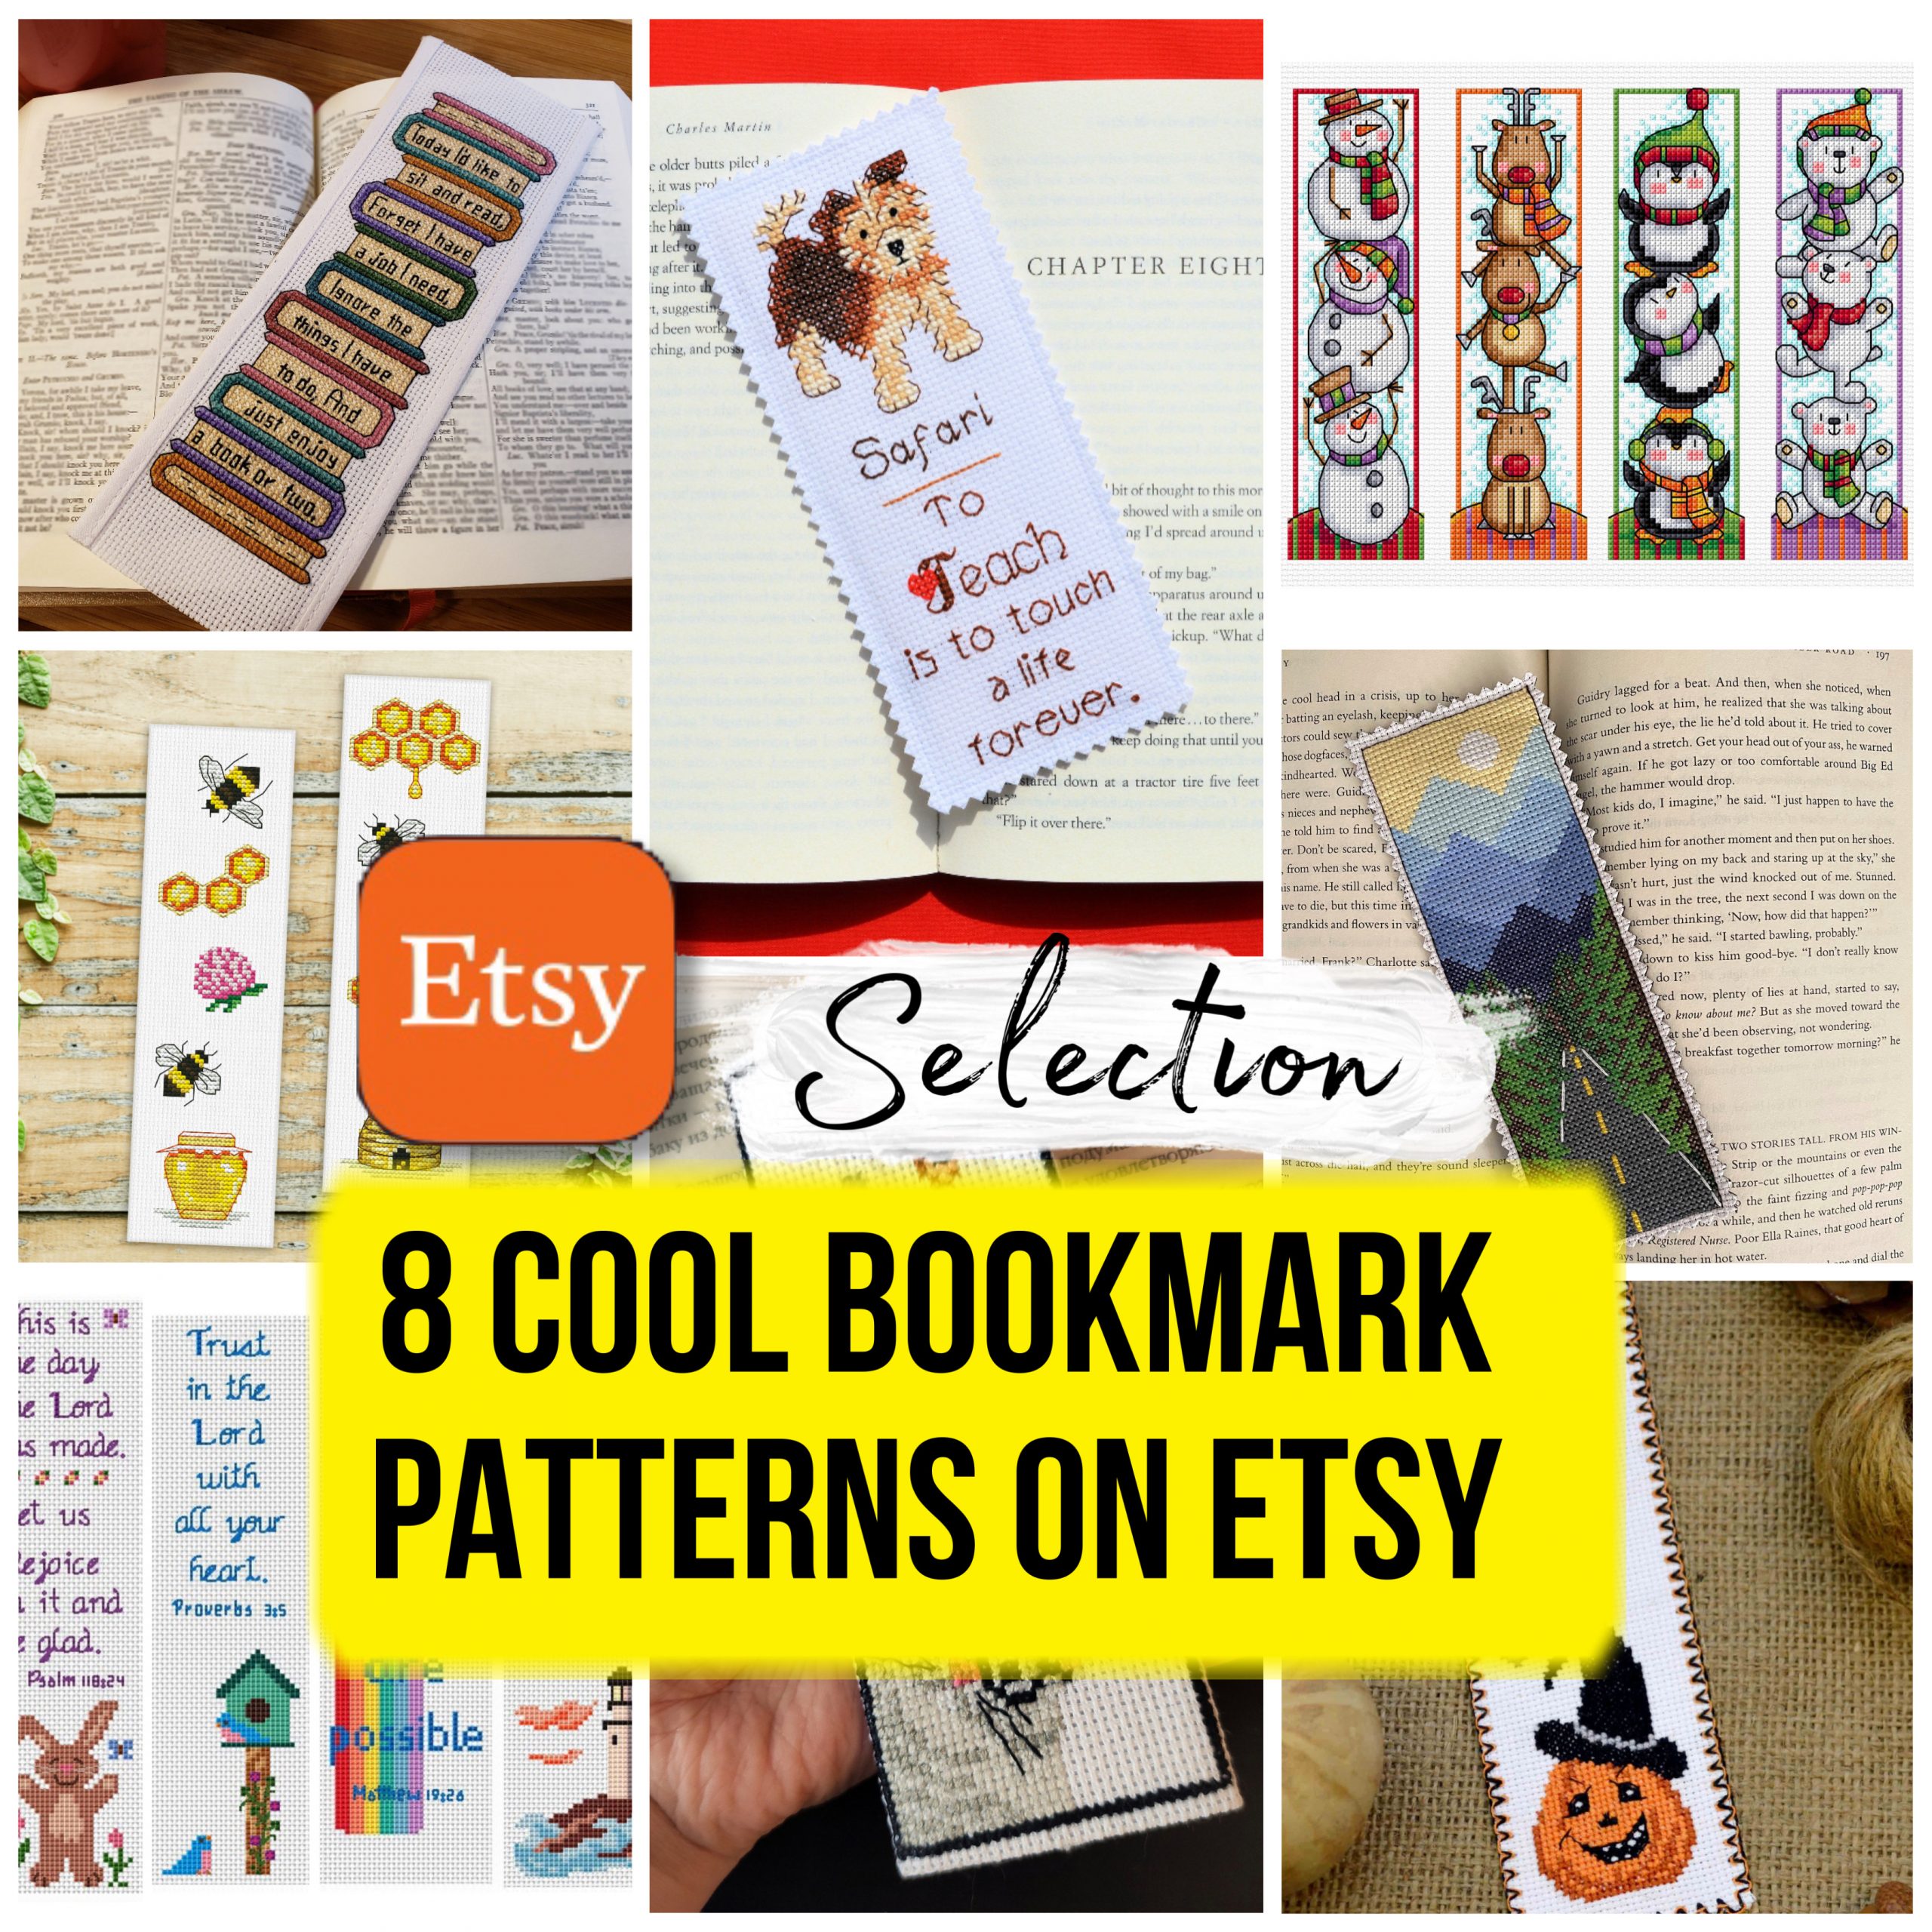 8 cool bookmark patterns on Etsy